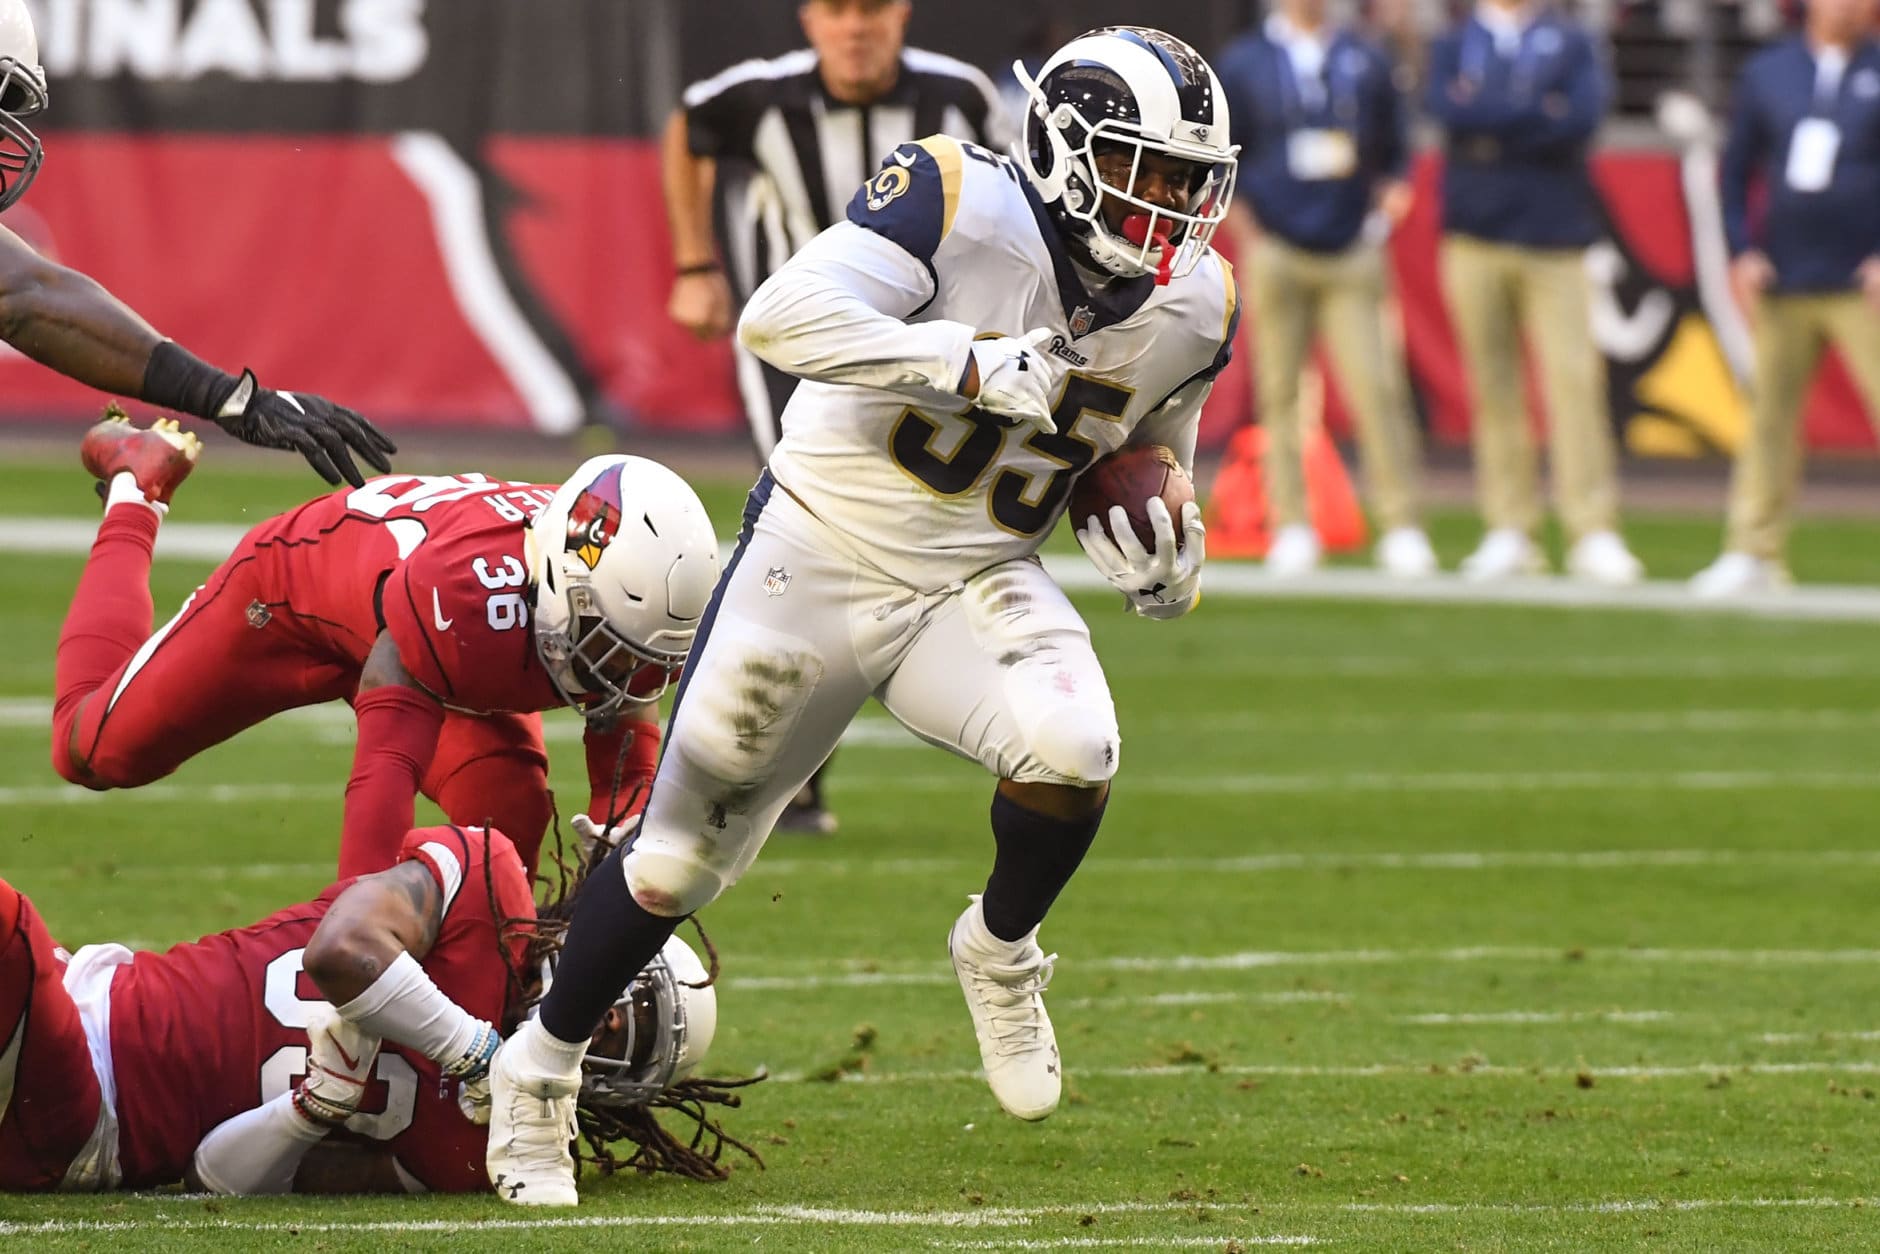 GLENDALE, ARIZONA - DECEMBER 23: C.J. Anderson #35 of the Los Angeles Rams carries against Tre Boston #33 and Budda Baker #36 of the Arizona Cardinals in the first half at State Farm Stadium on December 23, 2018 in Glendale, Arizona. (Photo by Norm Hall/Getty Images)